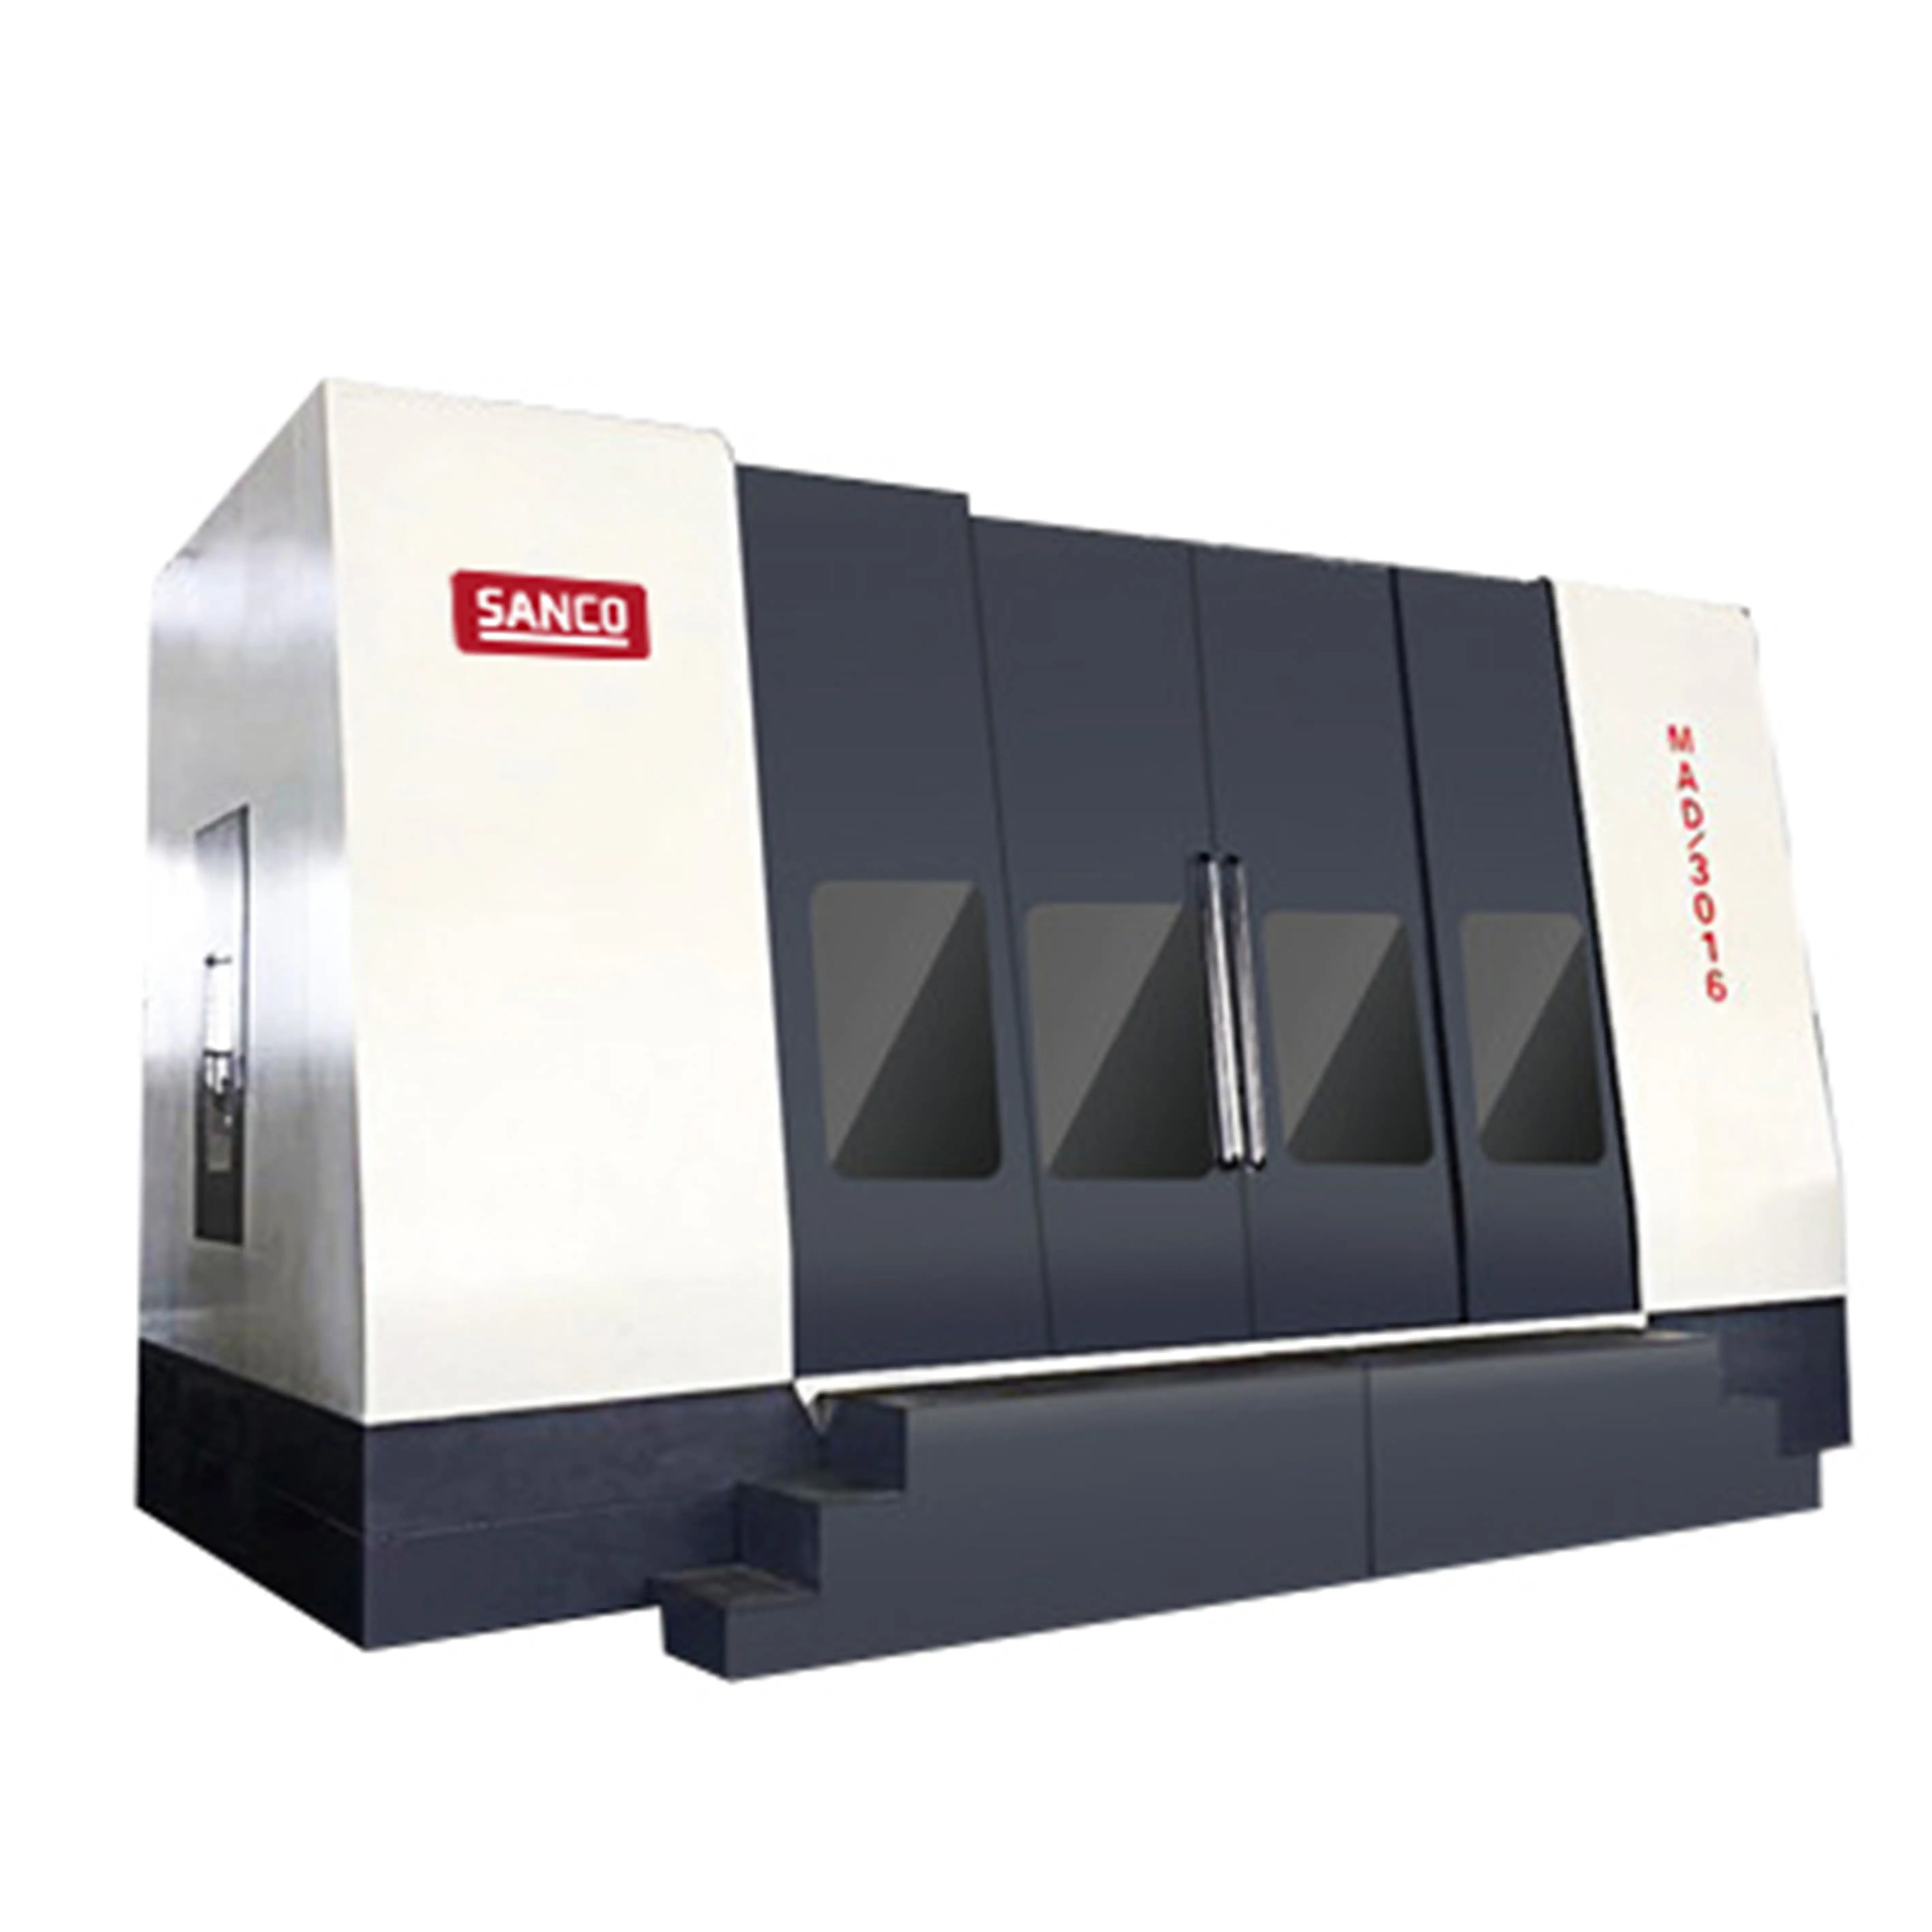 CNC deep hole drilling multi-axis milling machine